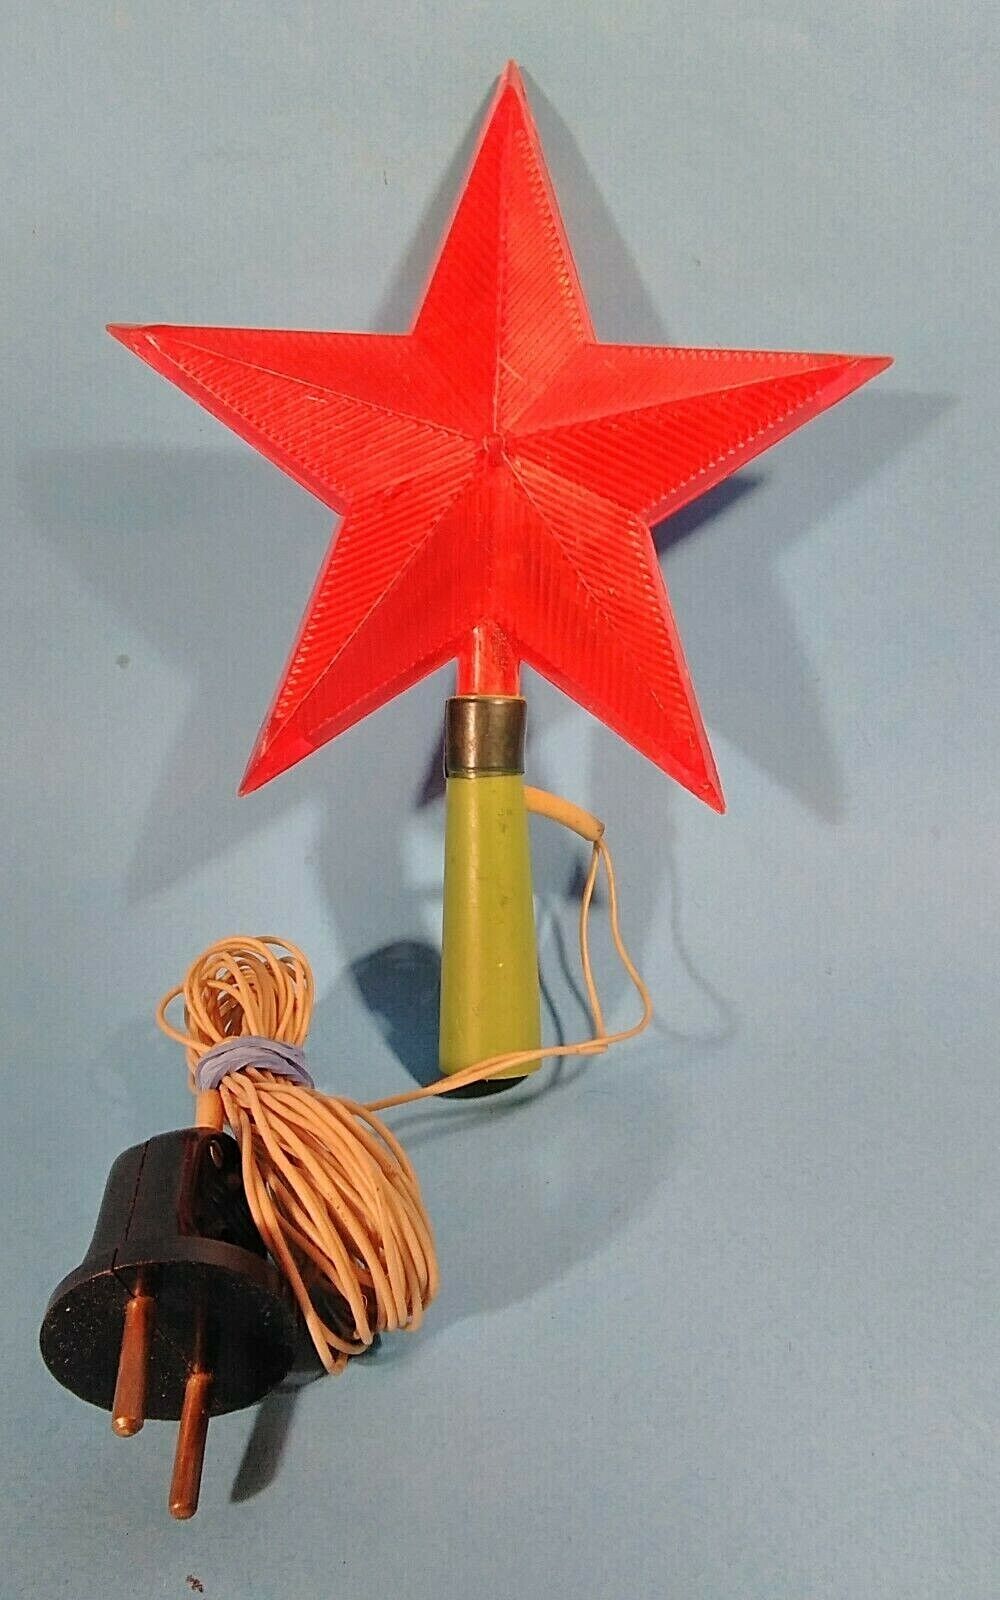 vitage Soviet Russian CHRISTMAS Tree Topper STAR toy electric ORNAMENTS 70s USSR